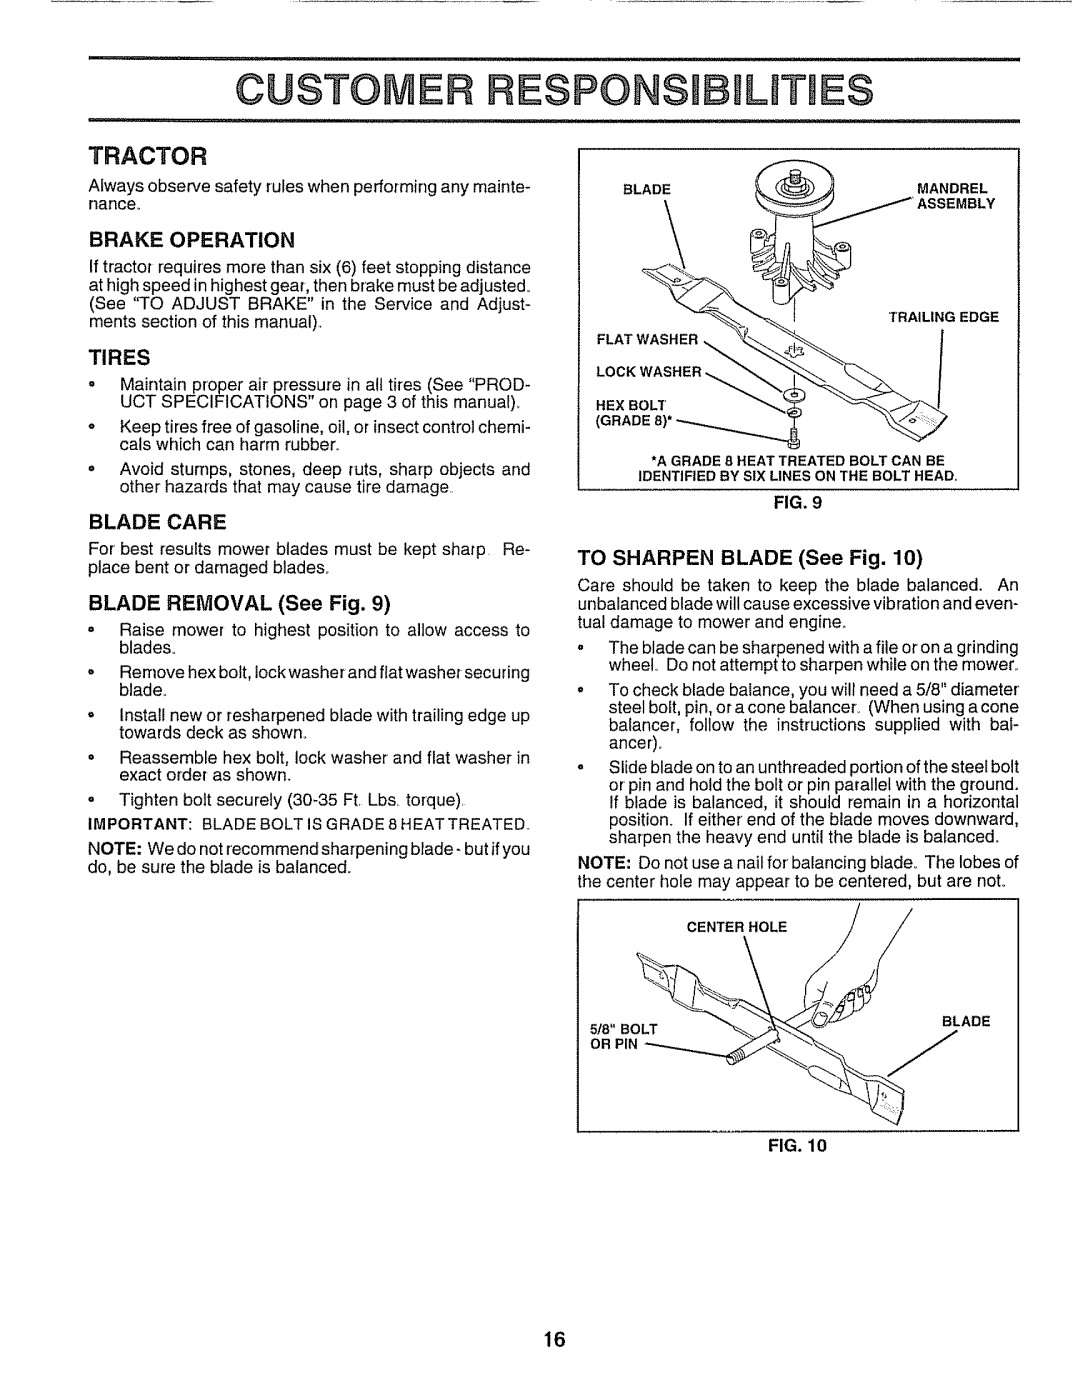 Craftsman 917.25651 owner manual Custo Responsj Il E$, Tractor, Brake Operation, TO SHARPEN BLADE See Fig 